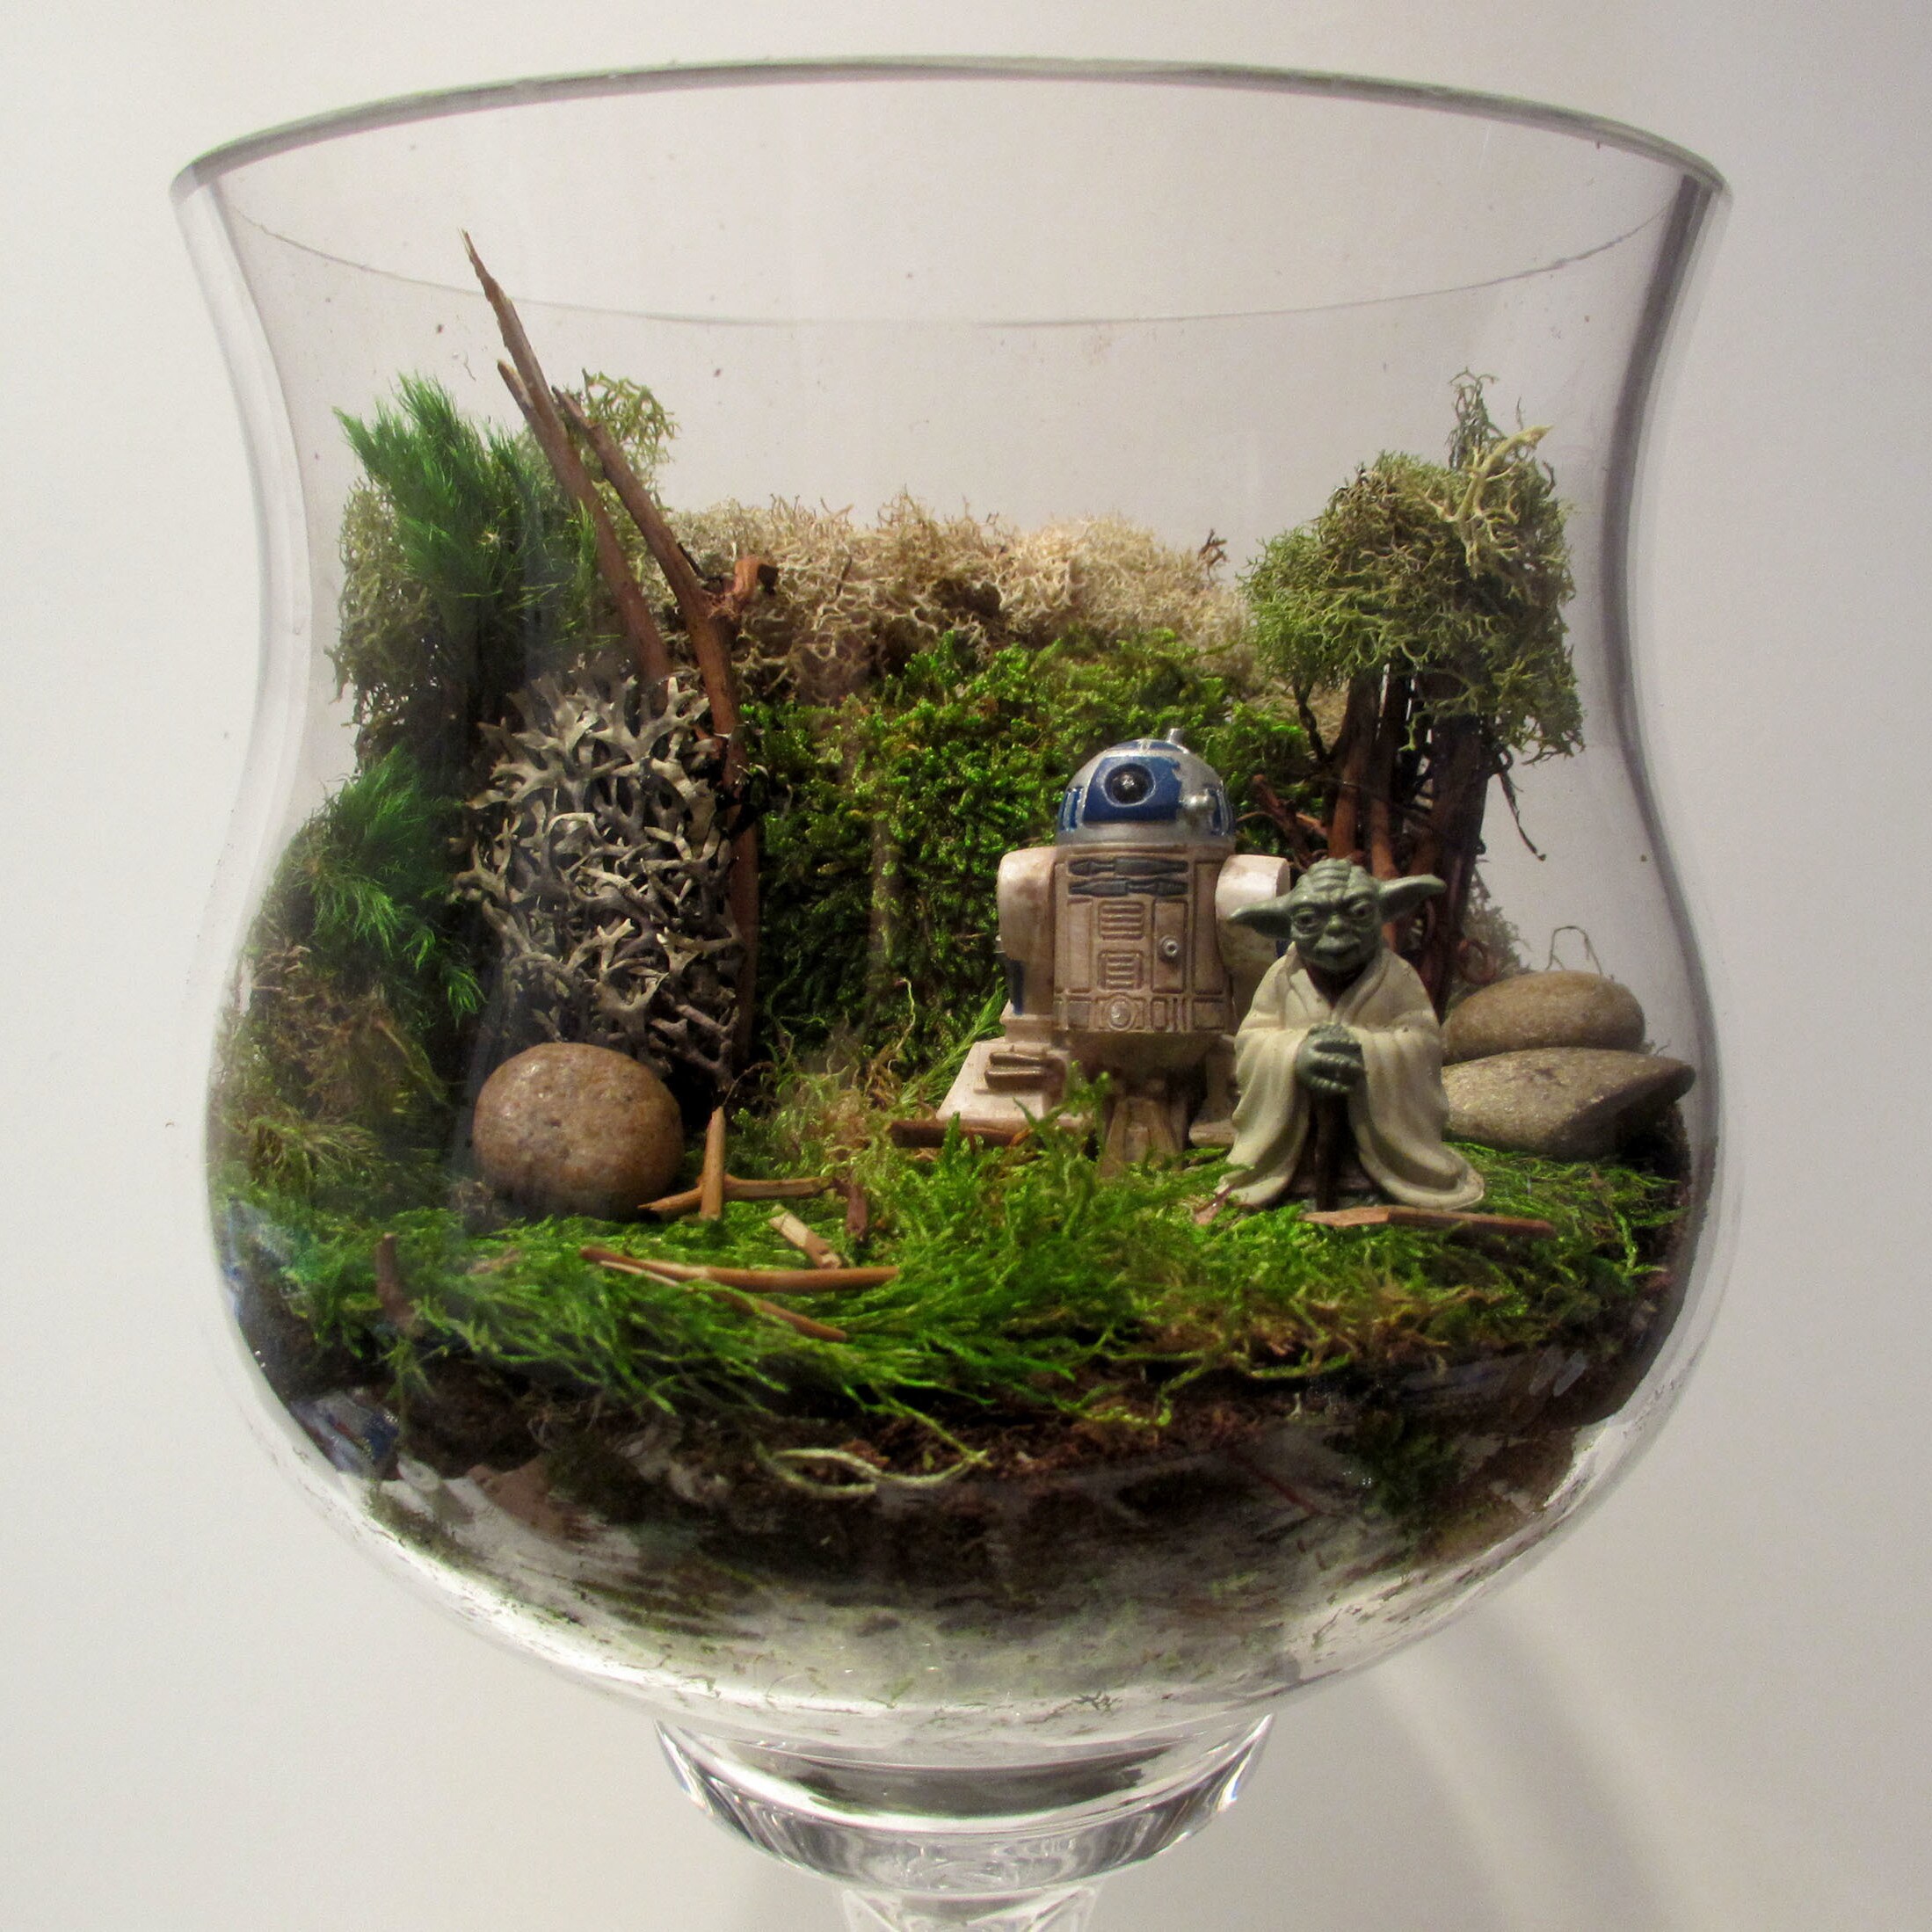 A terrarium at your table